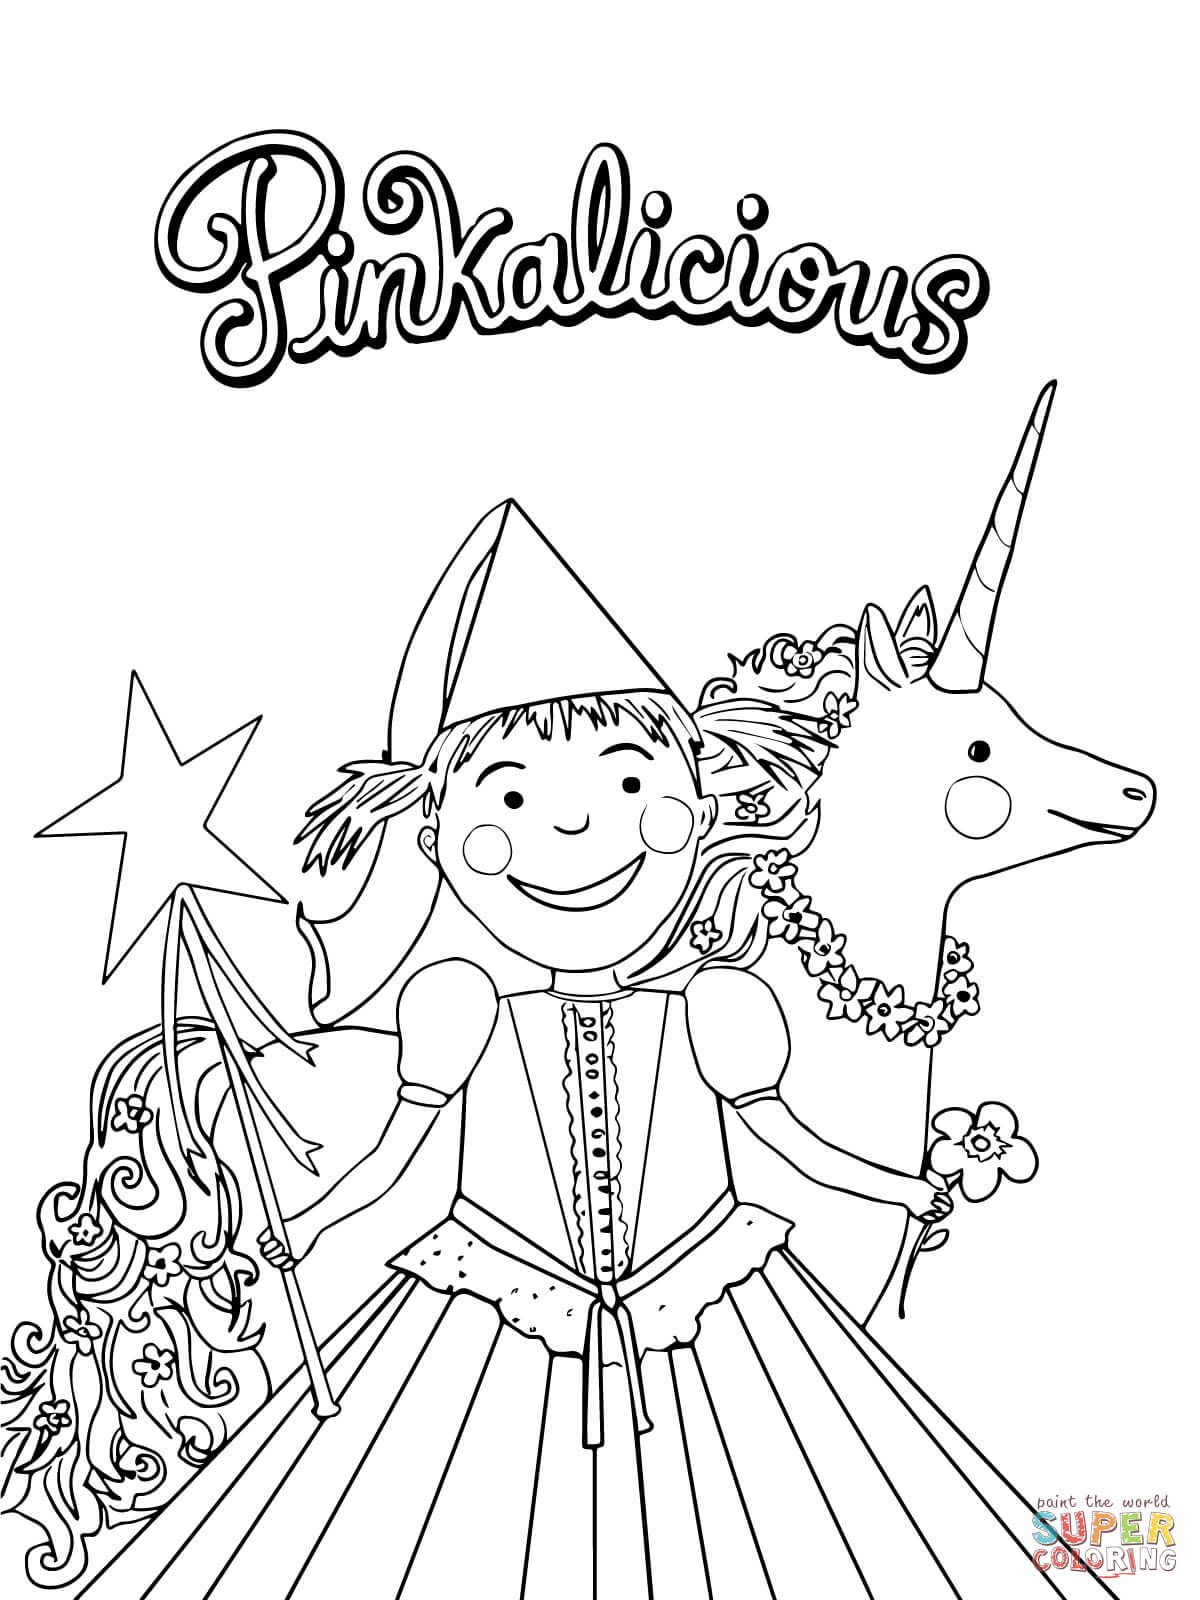 Pinkalicious coloring page from pinkalicious category select from printable crafts of cartâ pinkalicious party pinkalicious birthday party coloring pages